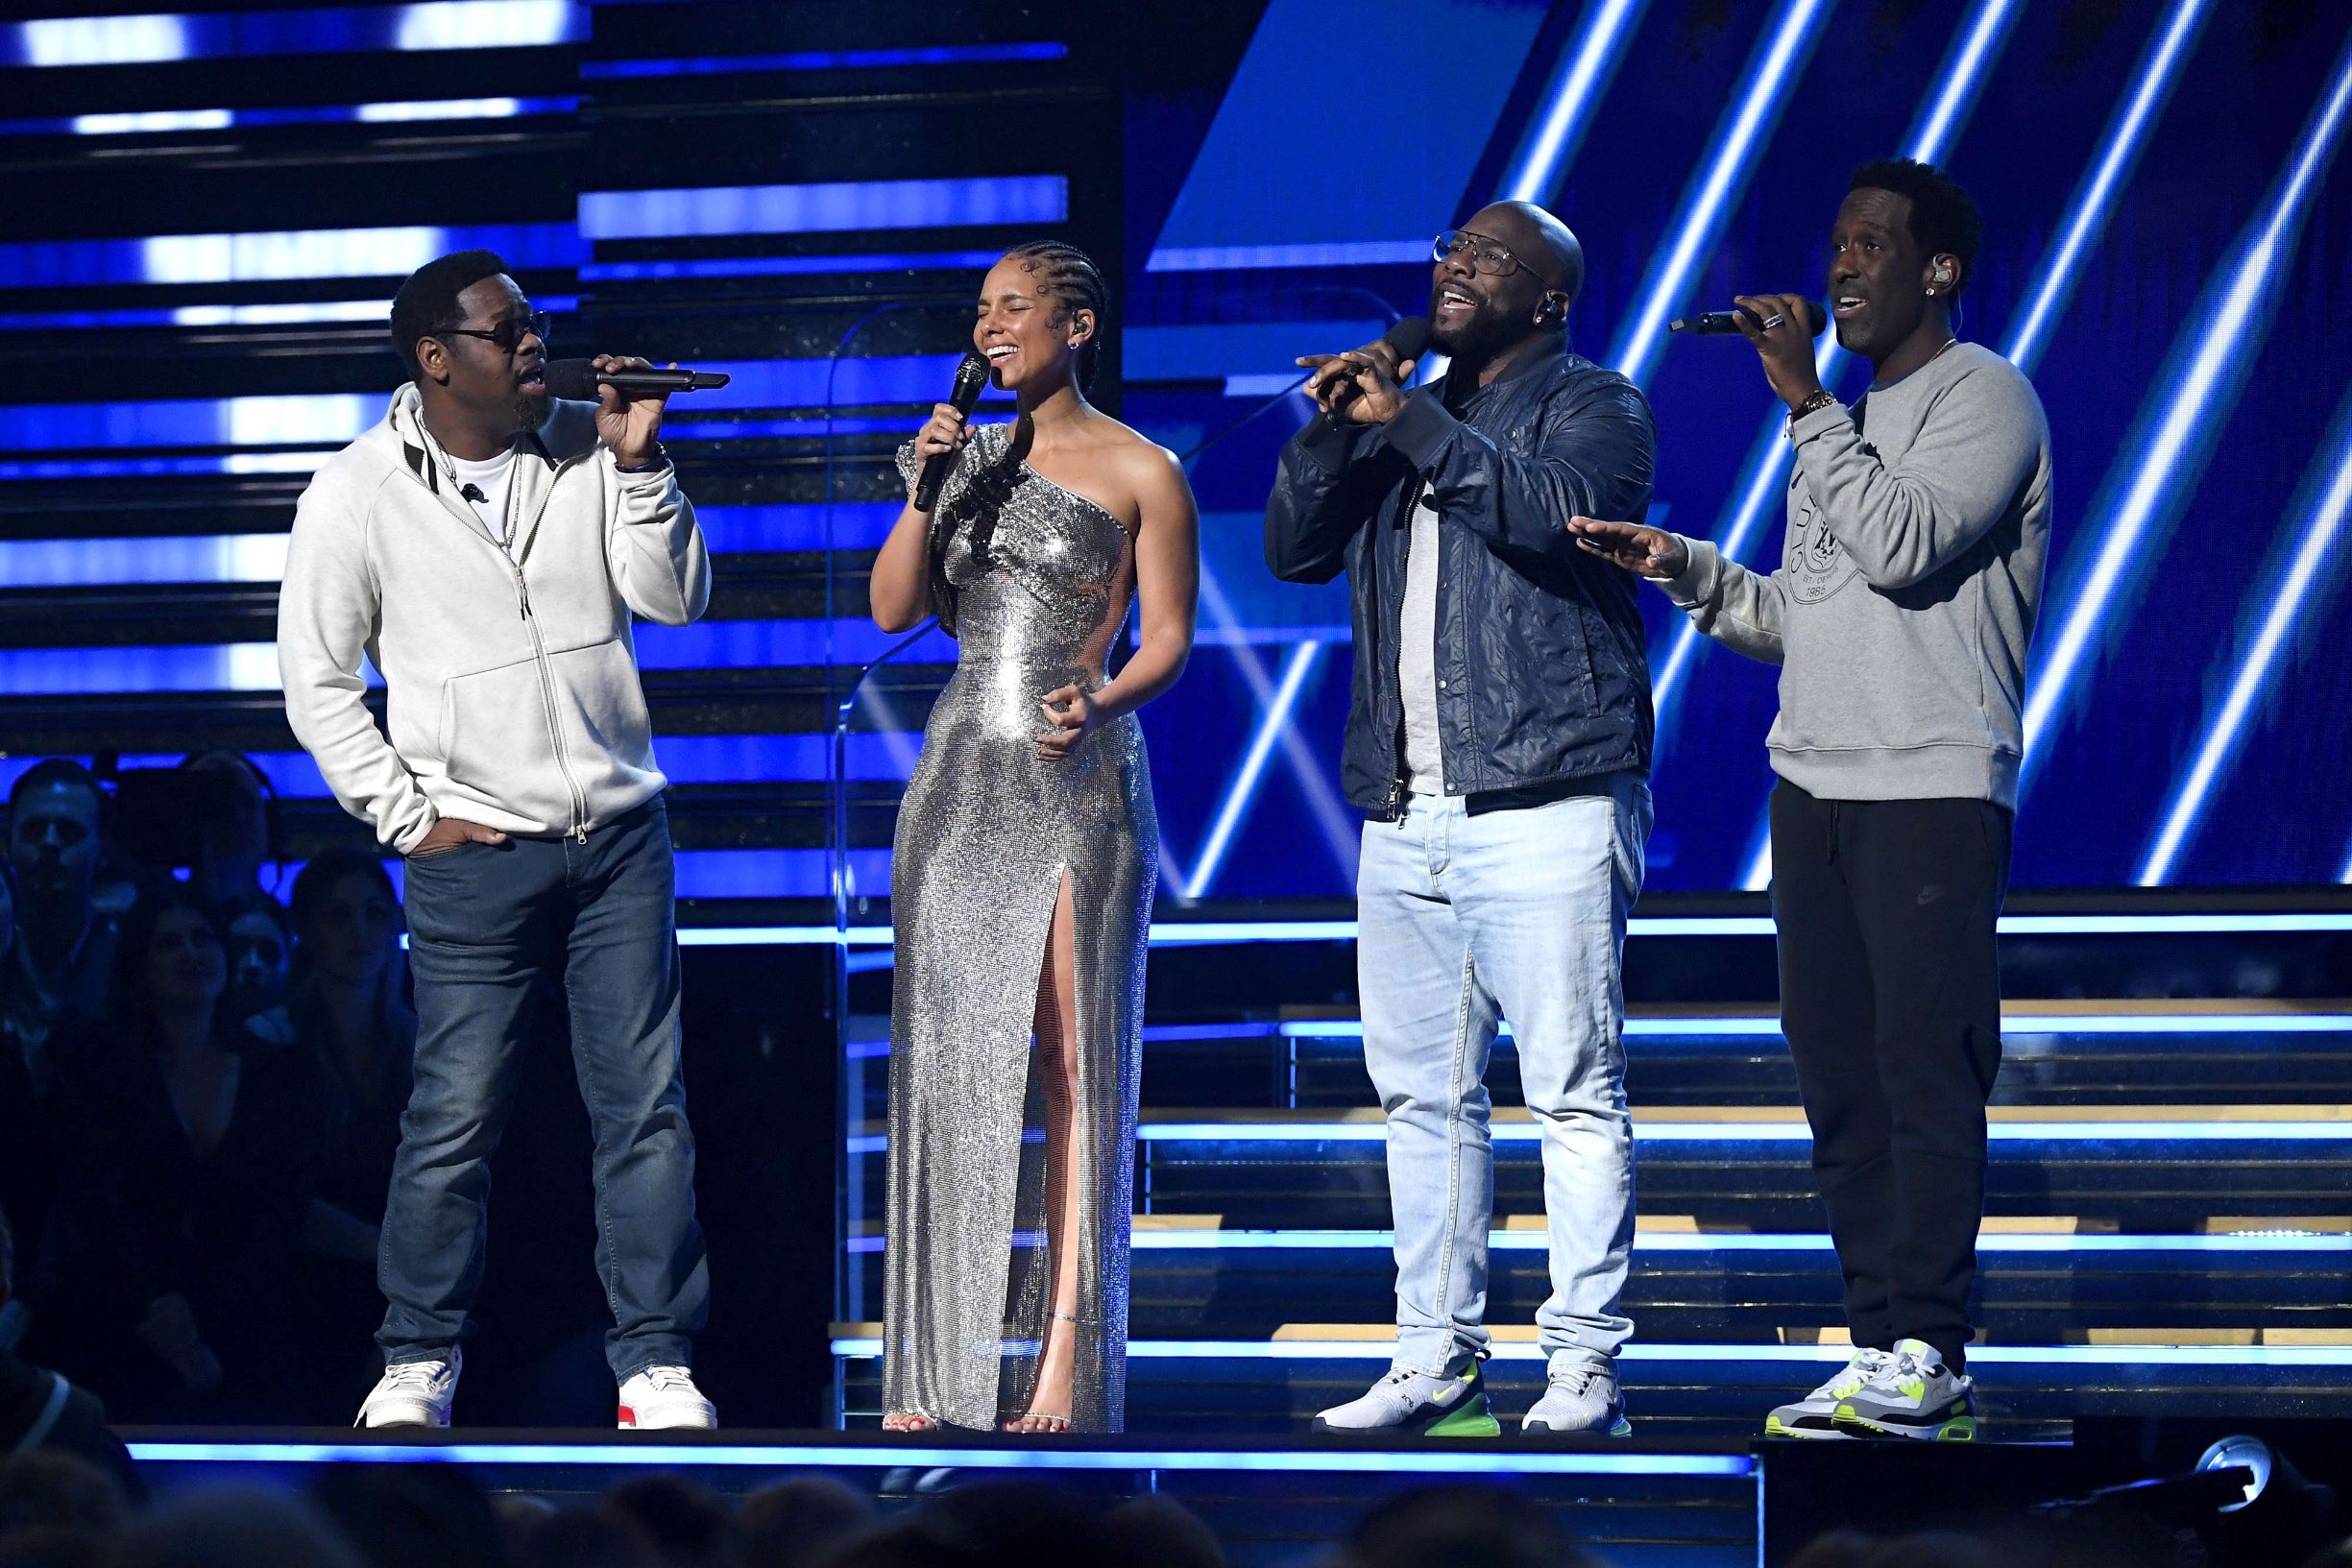 LOS ANGELES, CALIFORNIA - JANUARY 26: Alicia Keys (2nd from L) and Nathan Morris, Wanya Morris, and Shawn Stockman of Boyz II Men perform onstage during the 62nd Annual GRAMMY Awards at Staples Center on January 26, 2020 in Los Angeles, California.   Kevork Djansezian/Getty Images/AFP
== FOR NEWSPAPERS, INTERNET, TELCOS & TELEVISION USE ONLY ==